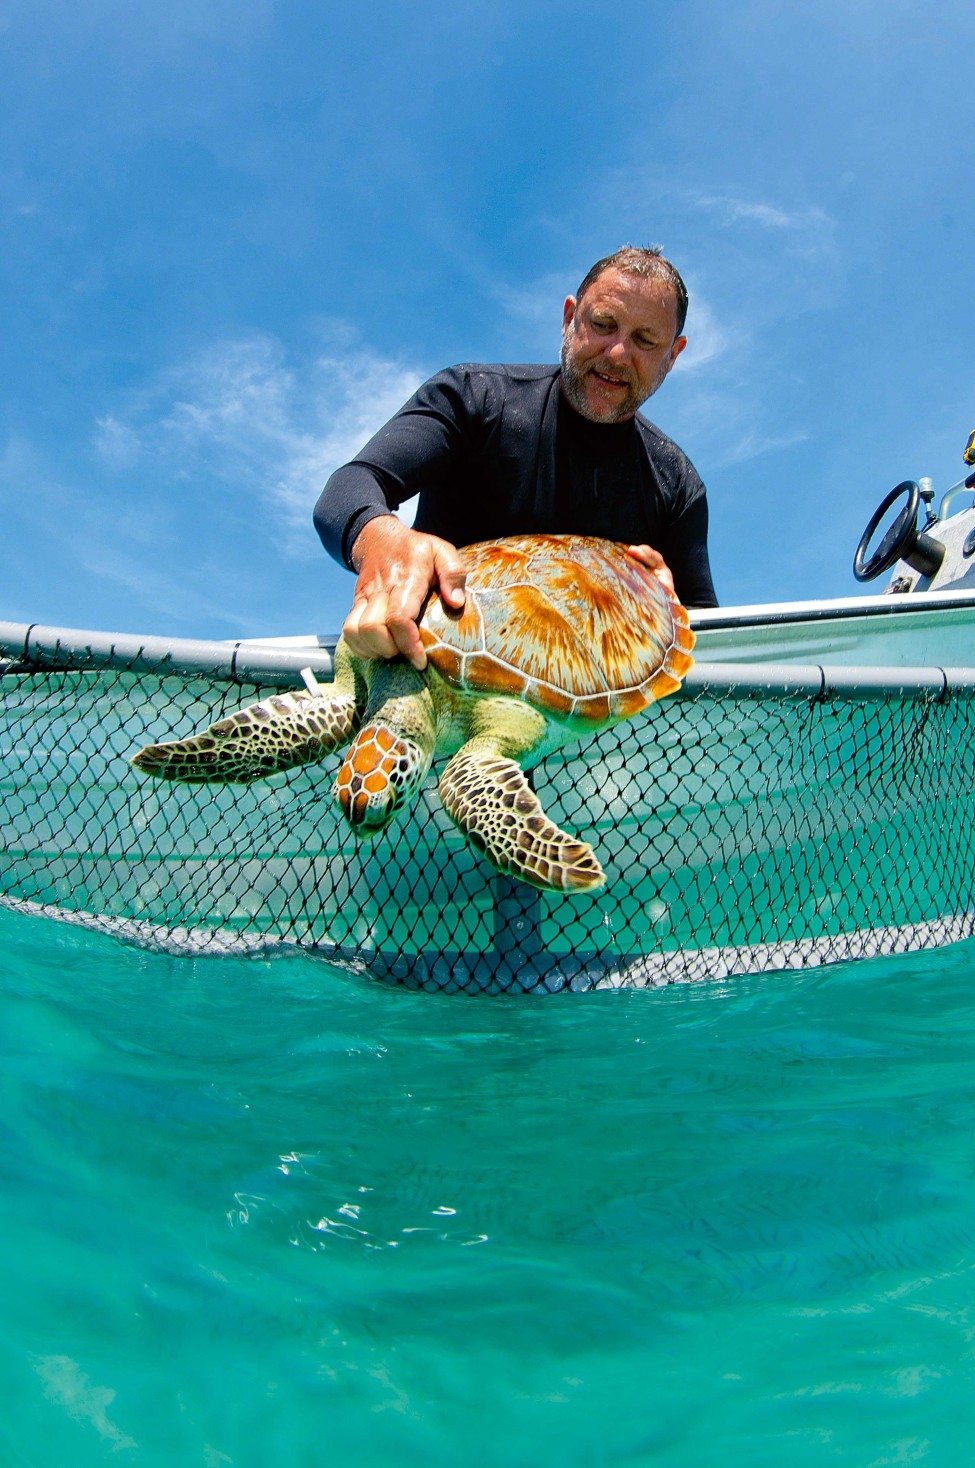 For the past two decades, Nick Pilcher has been working with turtles in Malaysia, encouraging fishers to equip their nets with Turtle Excluder Devices that will help them to avoid catching these gentle marine reptiles.<br />
Photo by Gilbert Woolley